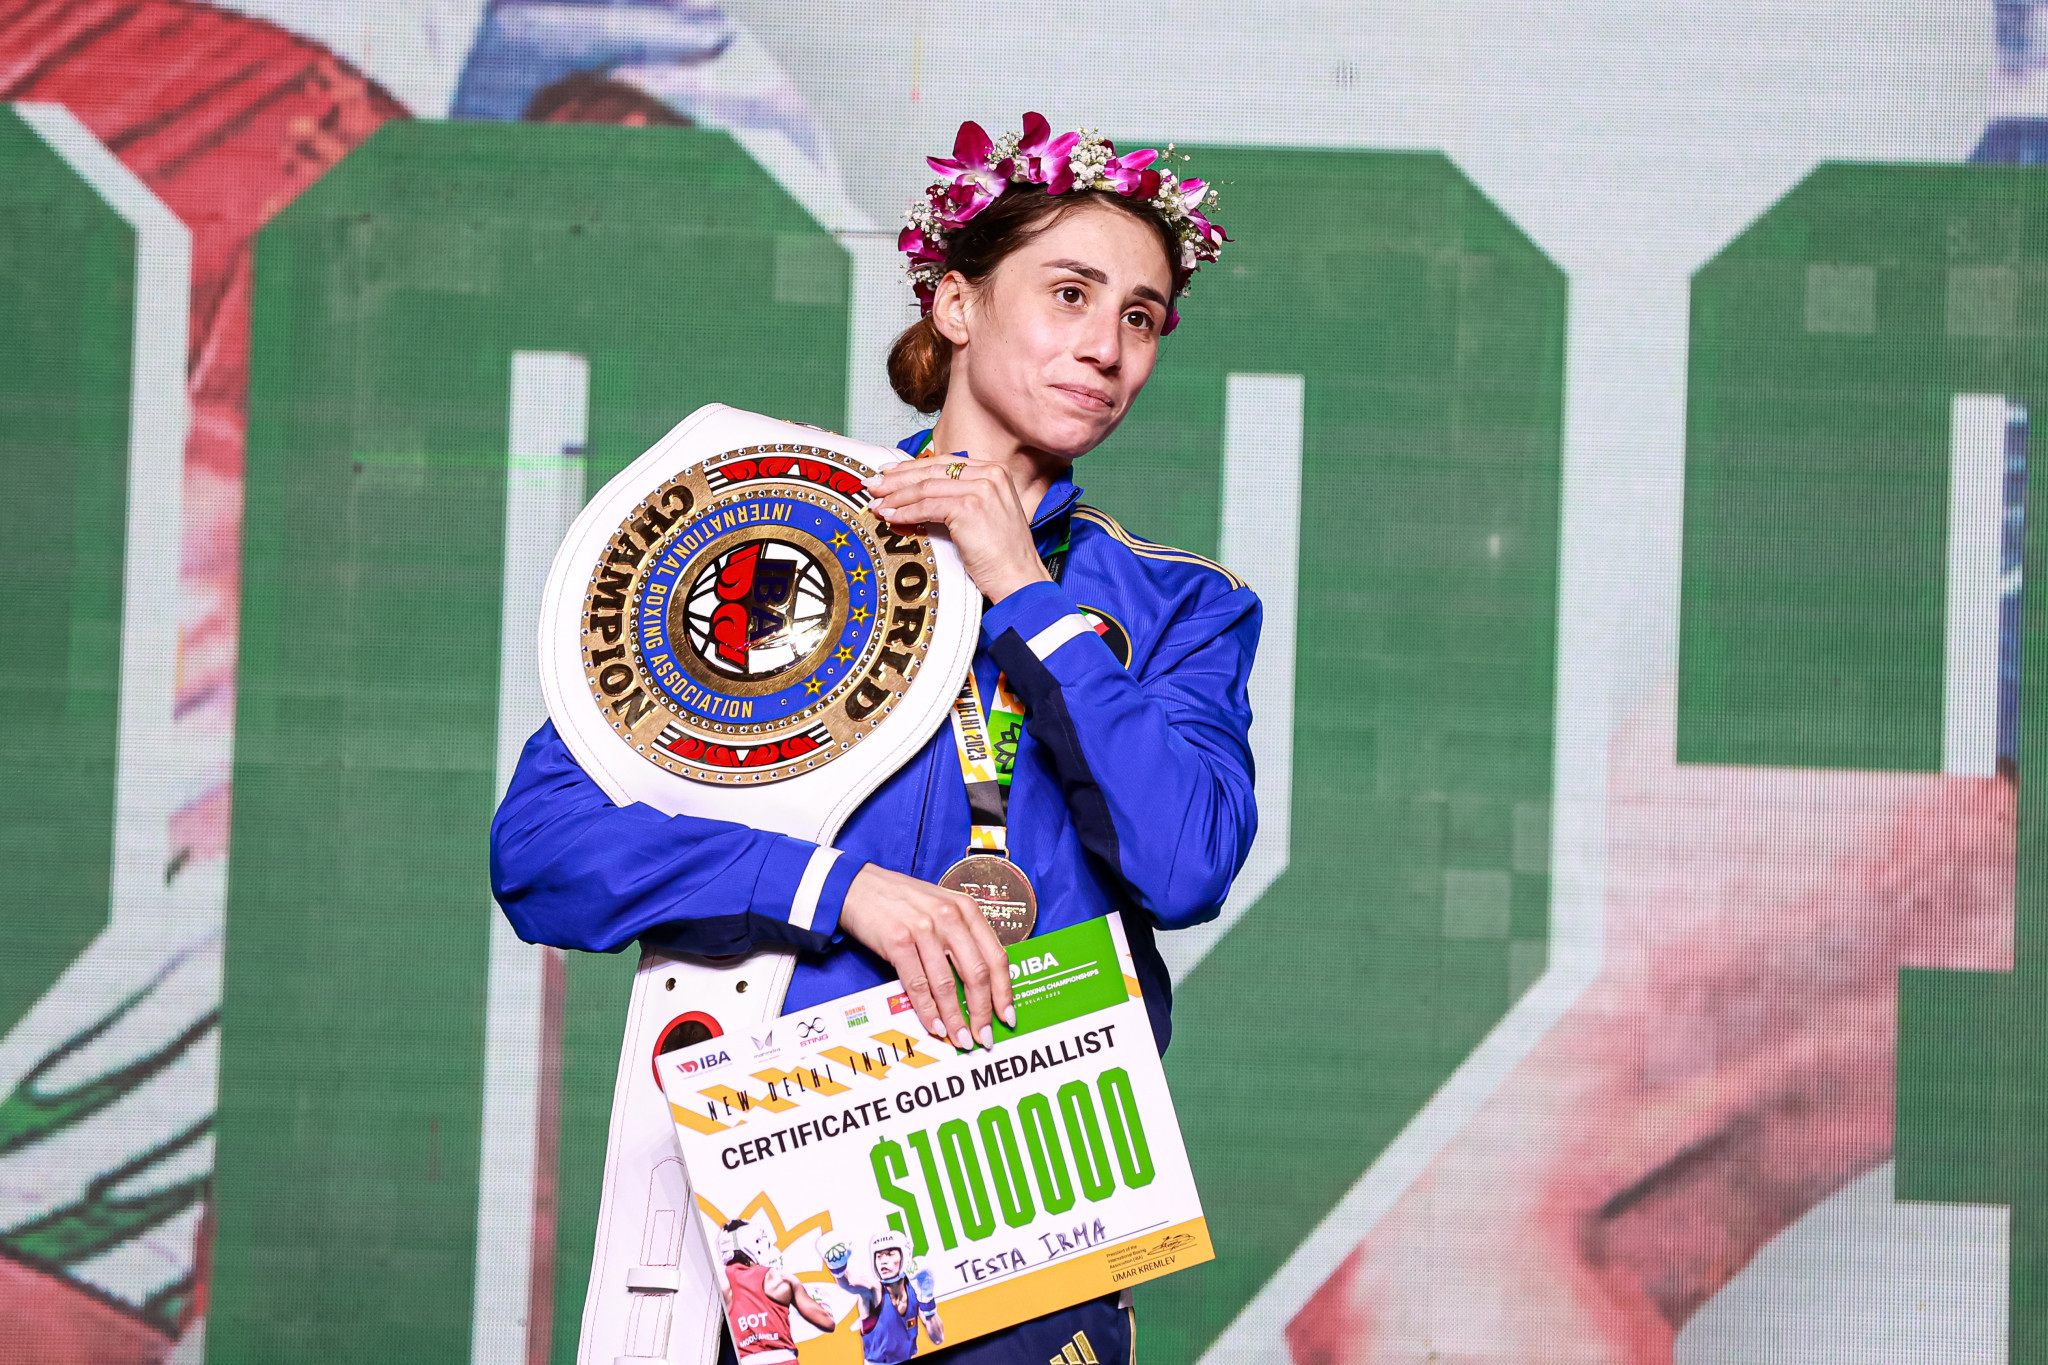 Irma Testa of Italy collected the featherweight gold medal, a belt and a cheque of $100,000 ©IBA